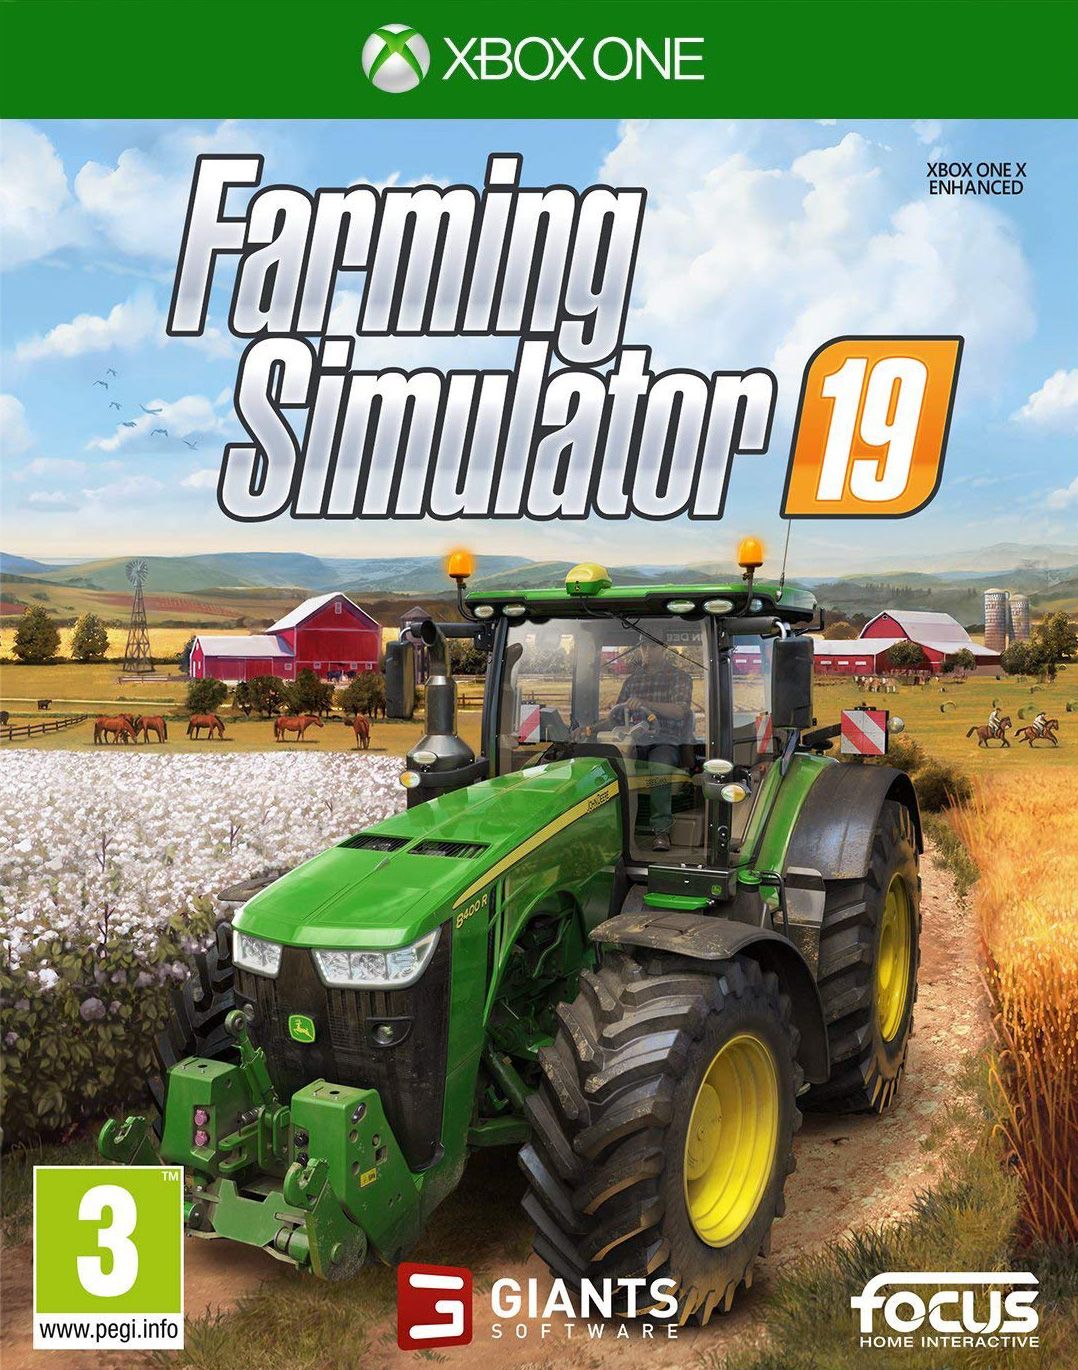 farming-simulator-19-xbox-one-new-buy-from-pwned-games-with-confidence-xbox-one-games-new